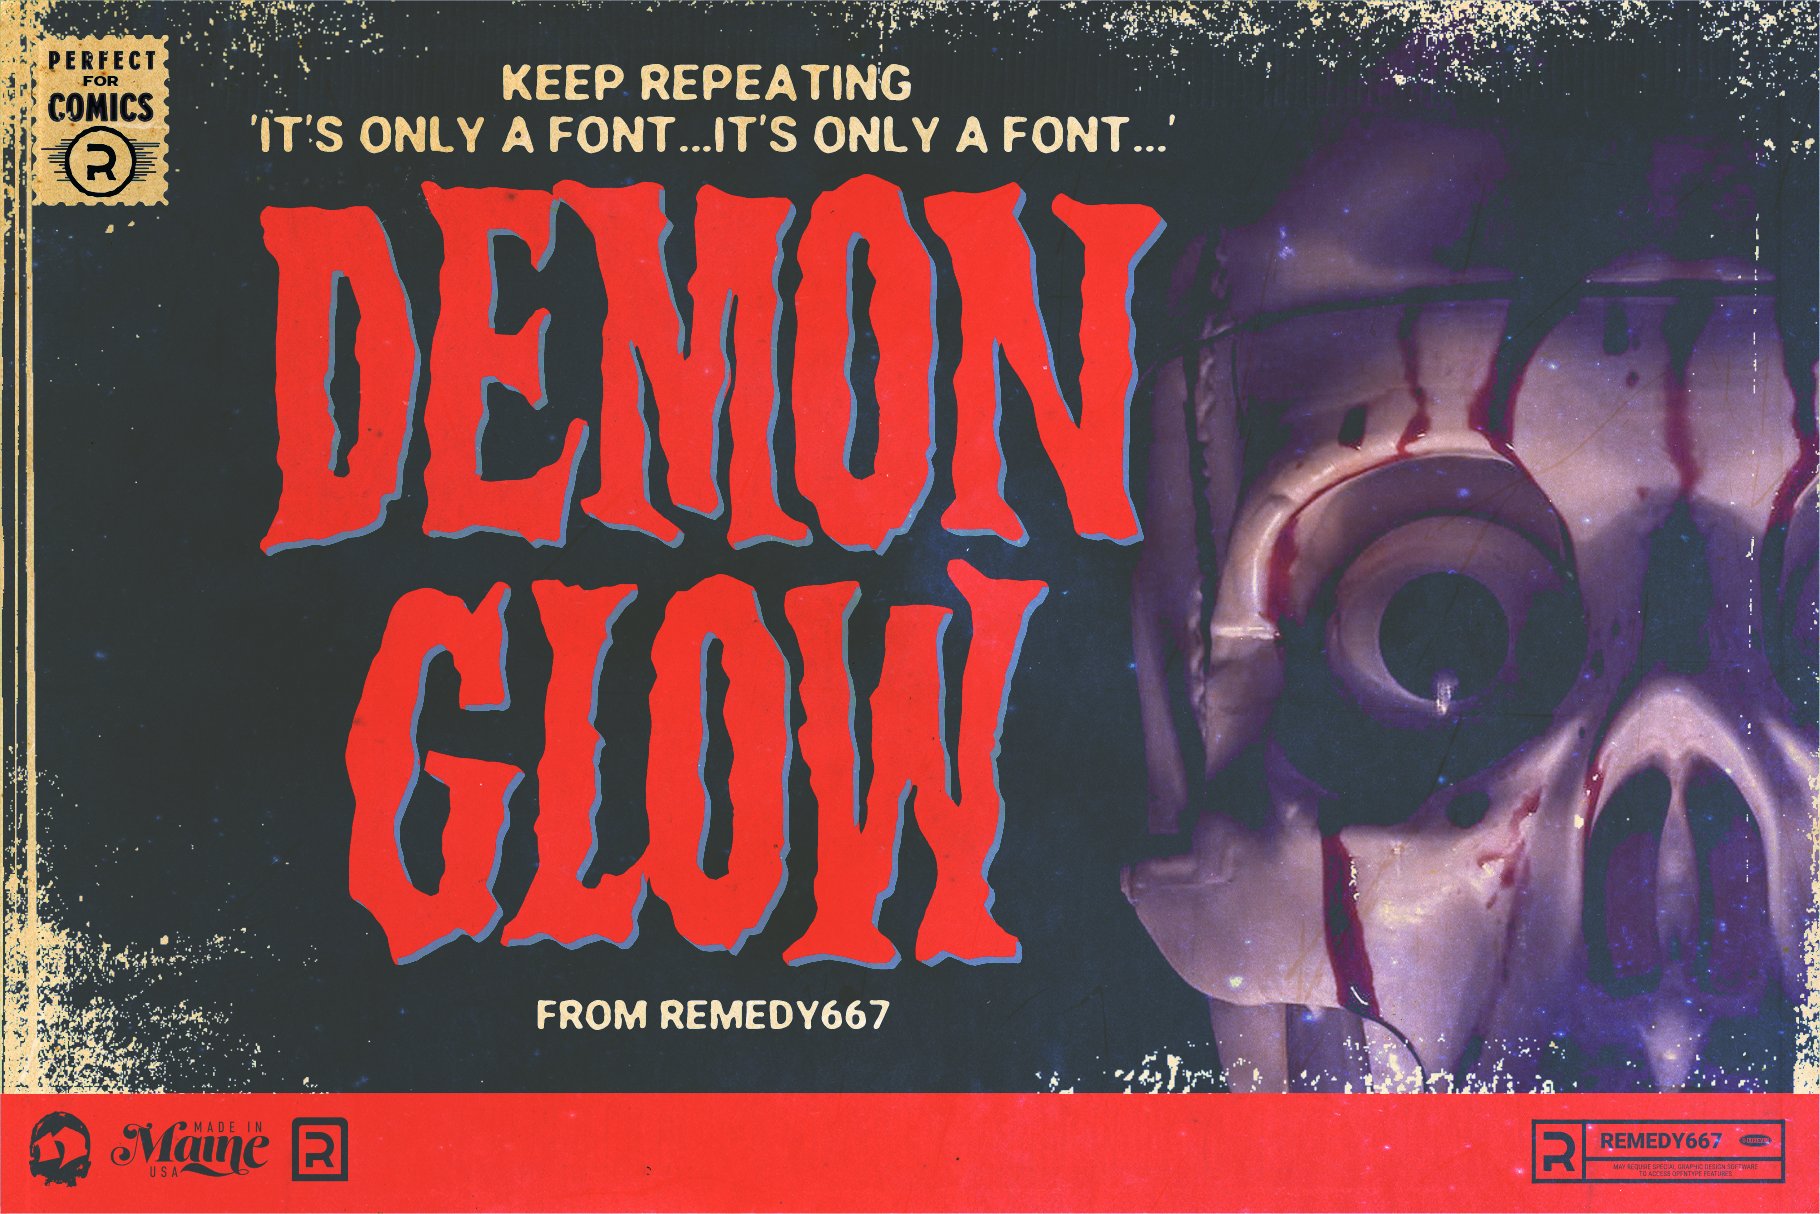 Demon Glow - Introductory Sale cover image.